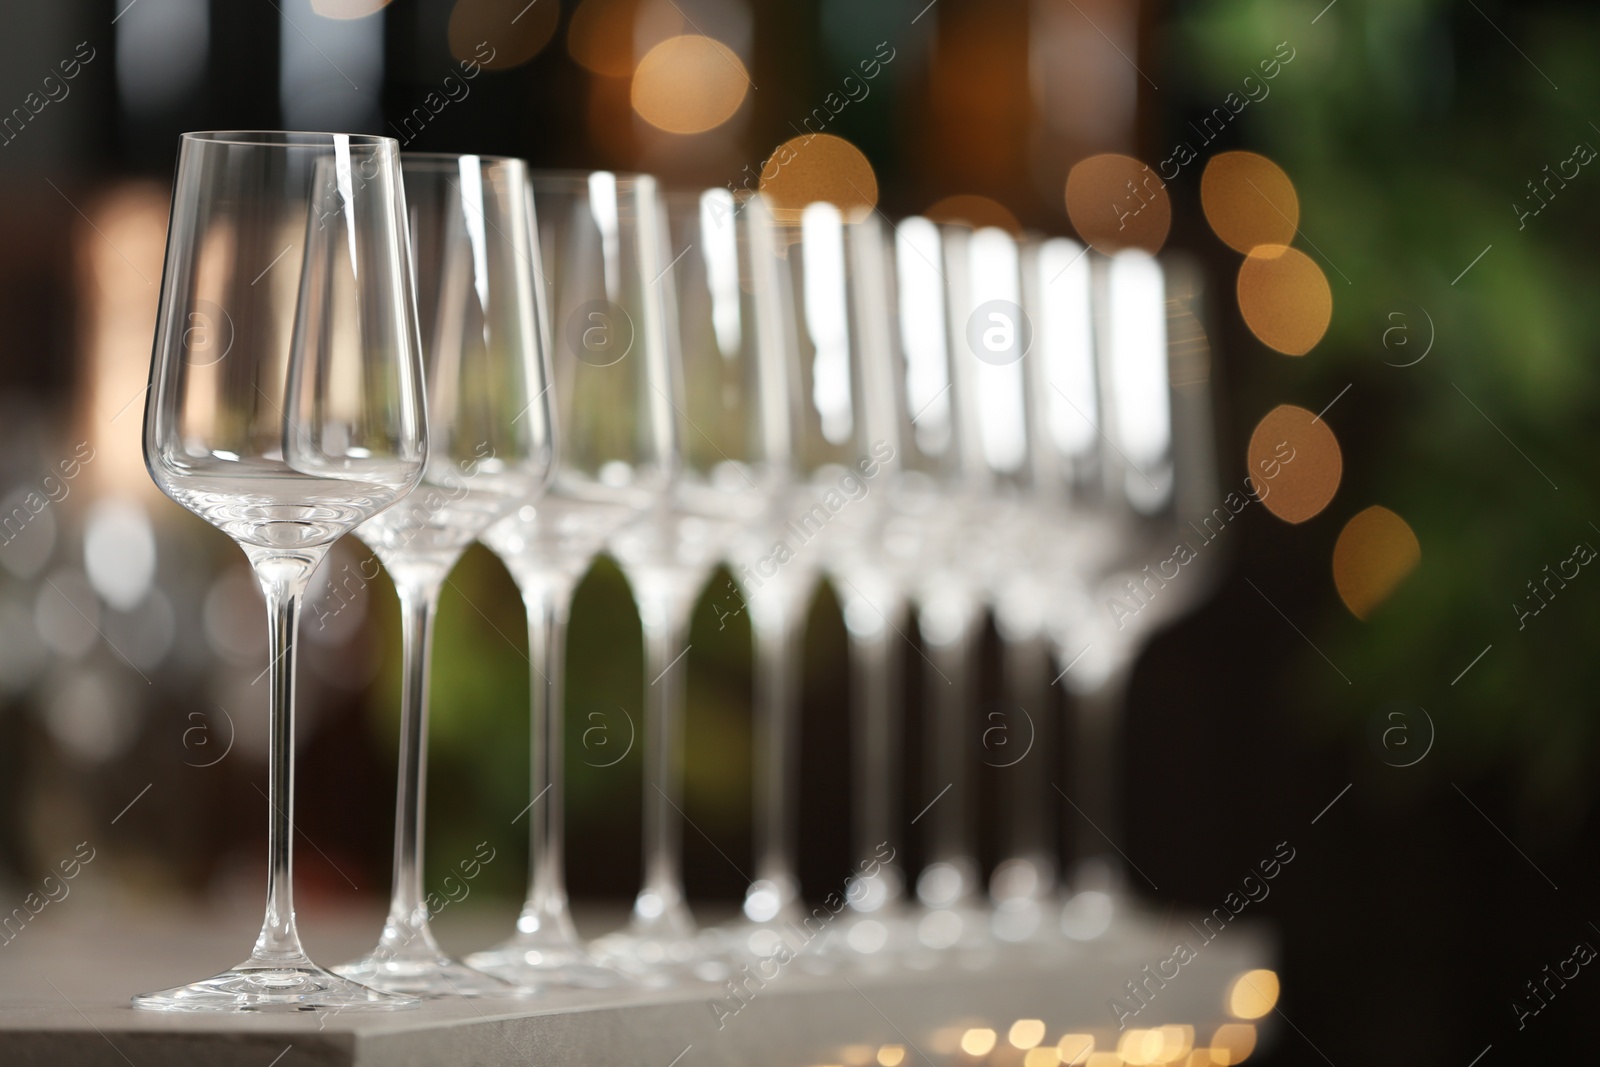 Photo of Set of empty wine glasses on grey table against blurred background